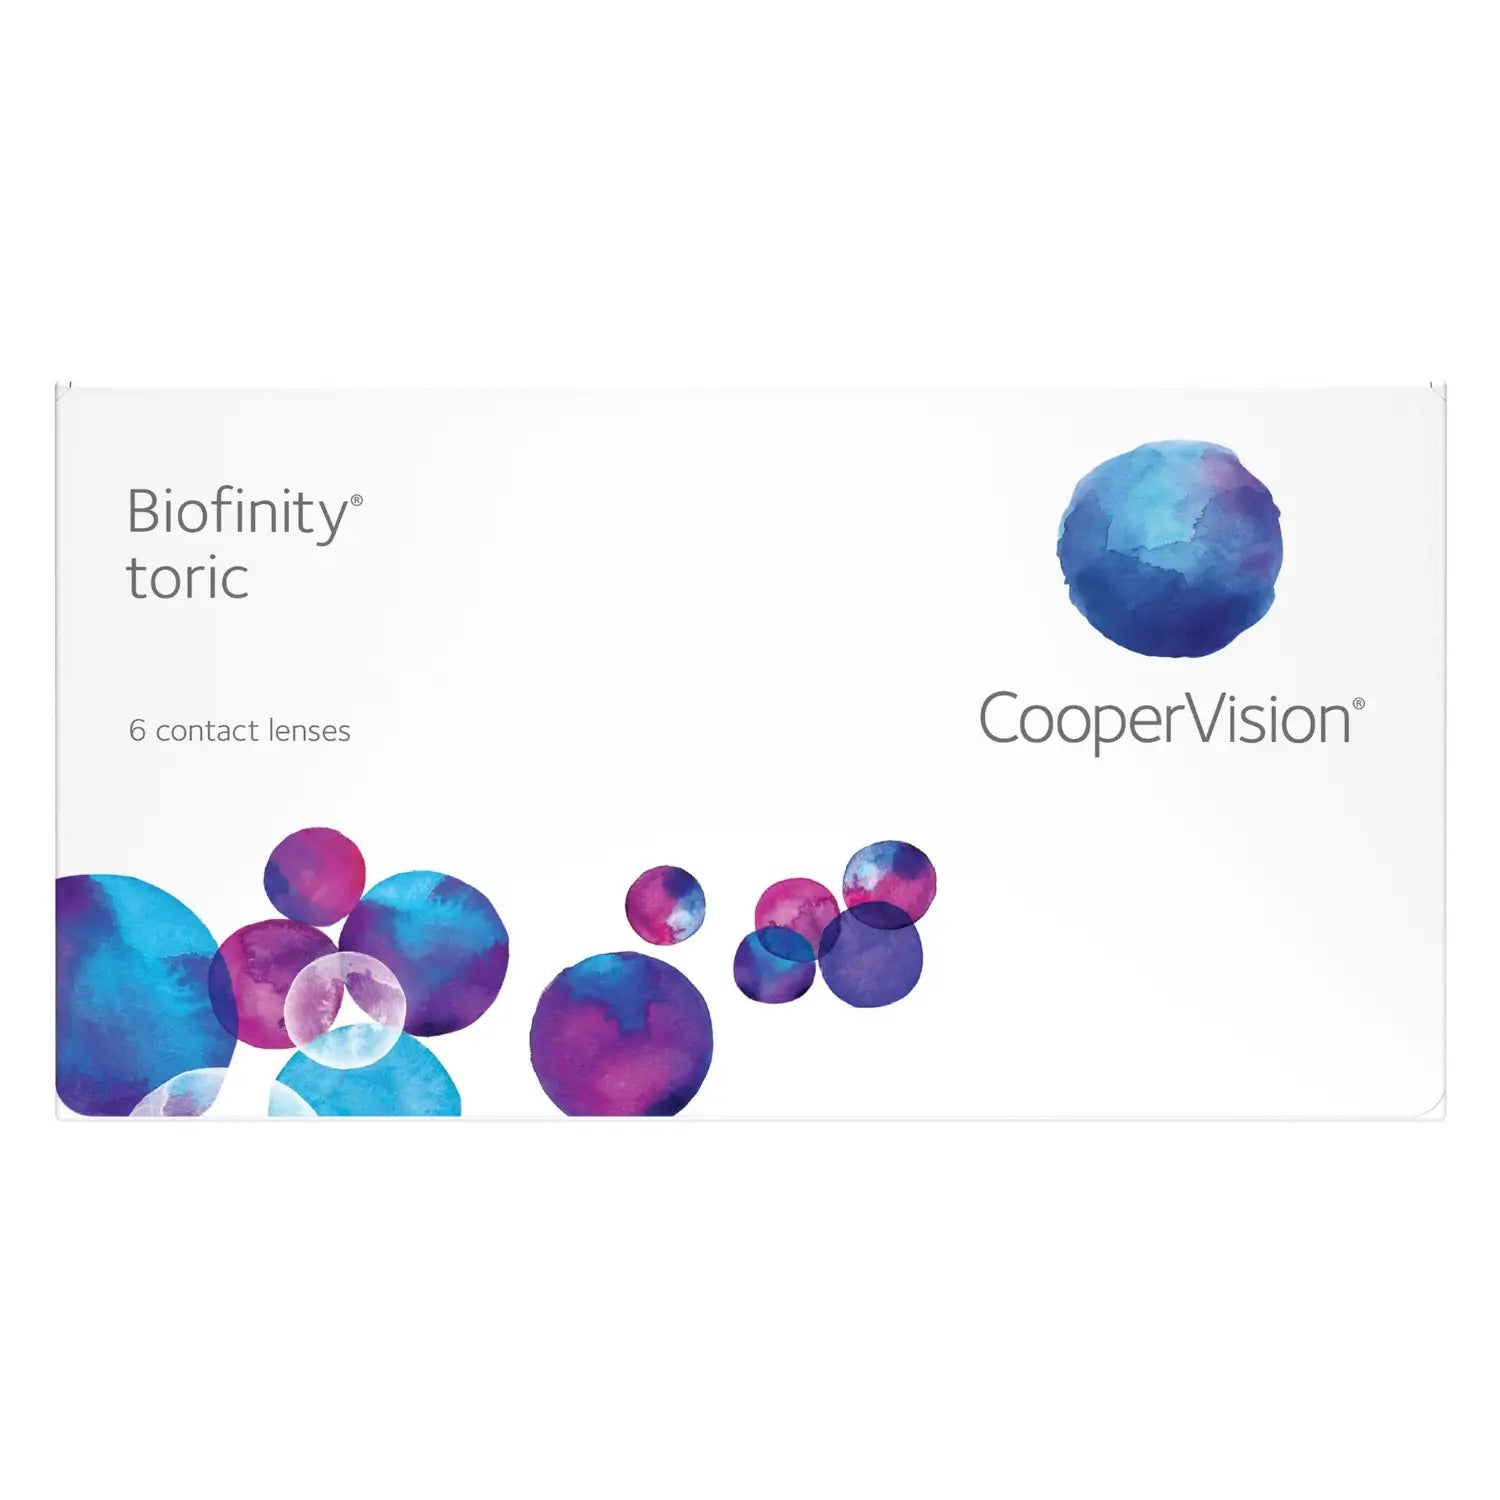 Certified Biofinity toric monthly Contact Lenses by Cooper Vision on sale online at The Optical Co at the best prices